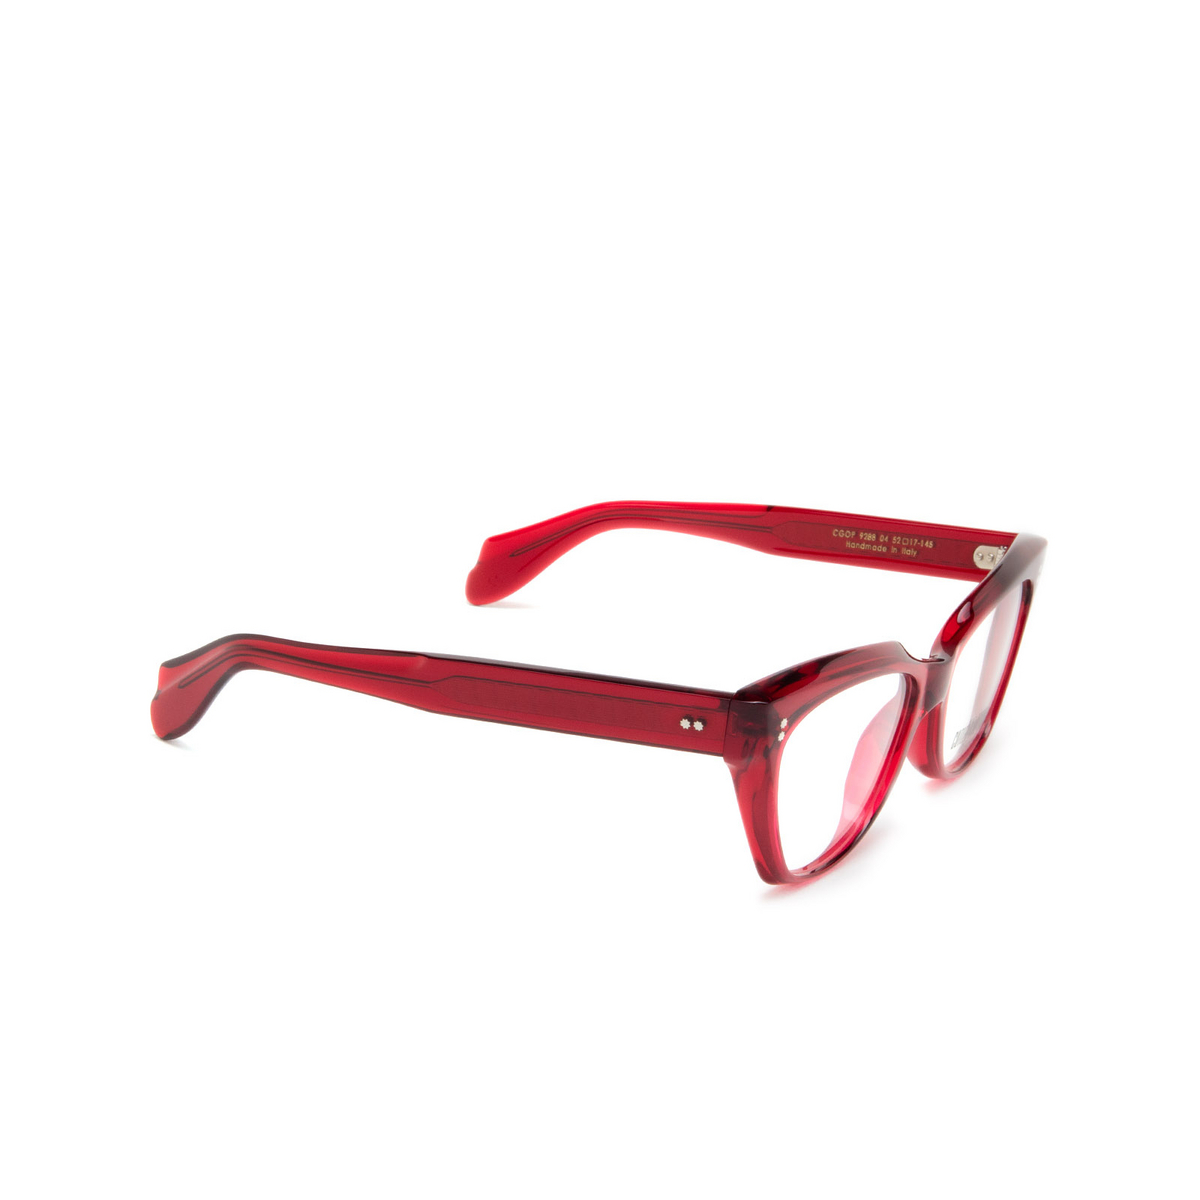 Cutler and Gross 9288 Eyeglasses 04 Crystal Red - three-quarters view